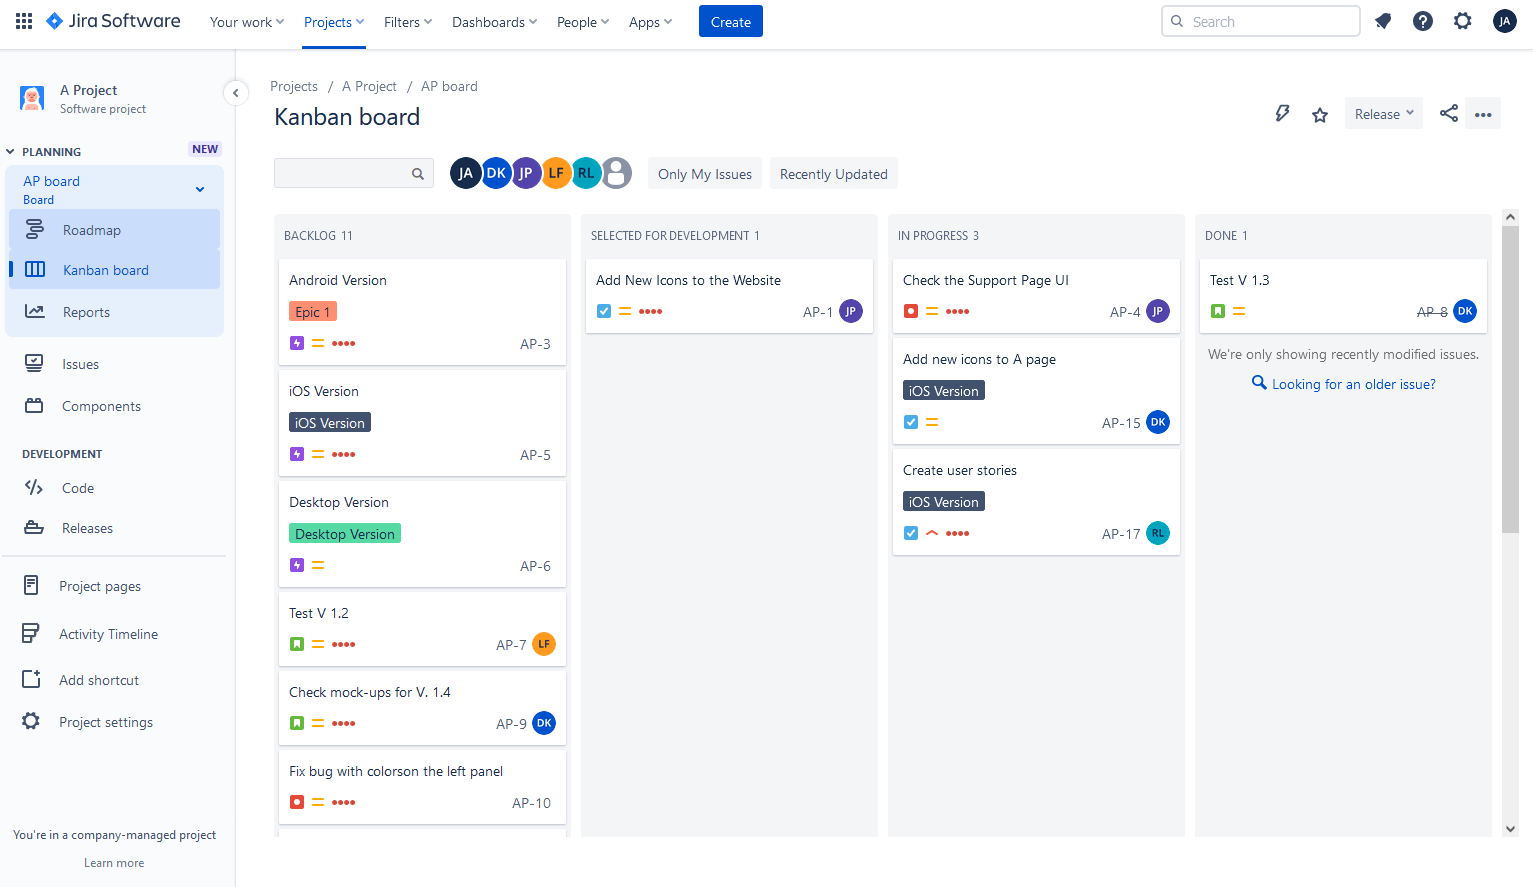 Plan and Track work from Jira